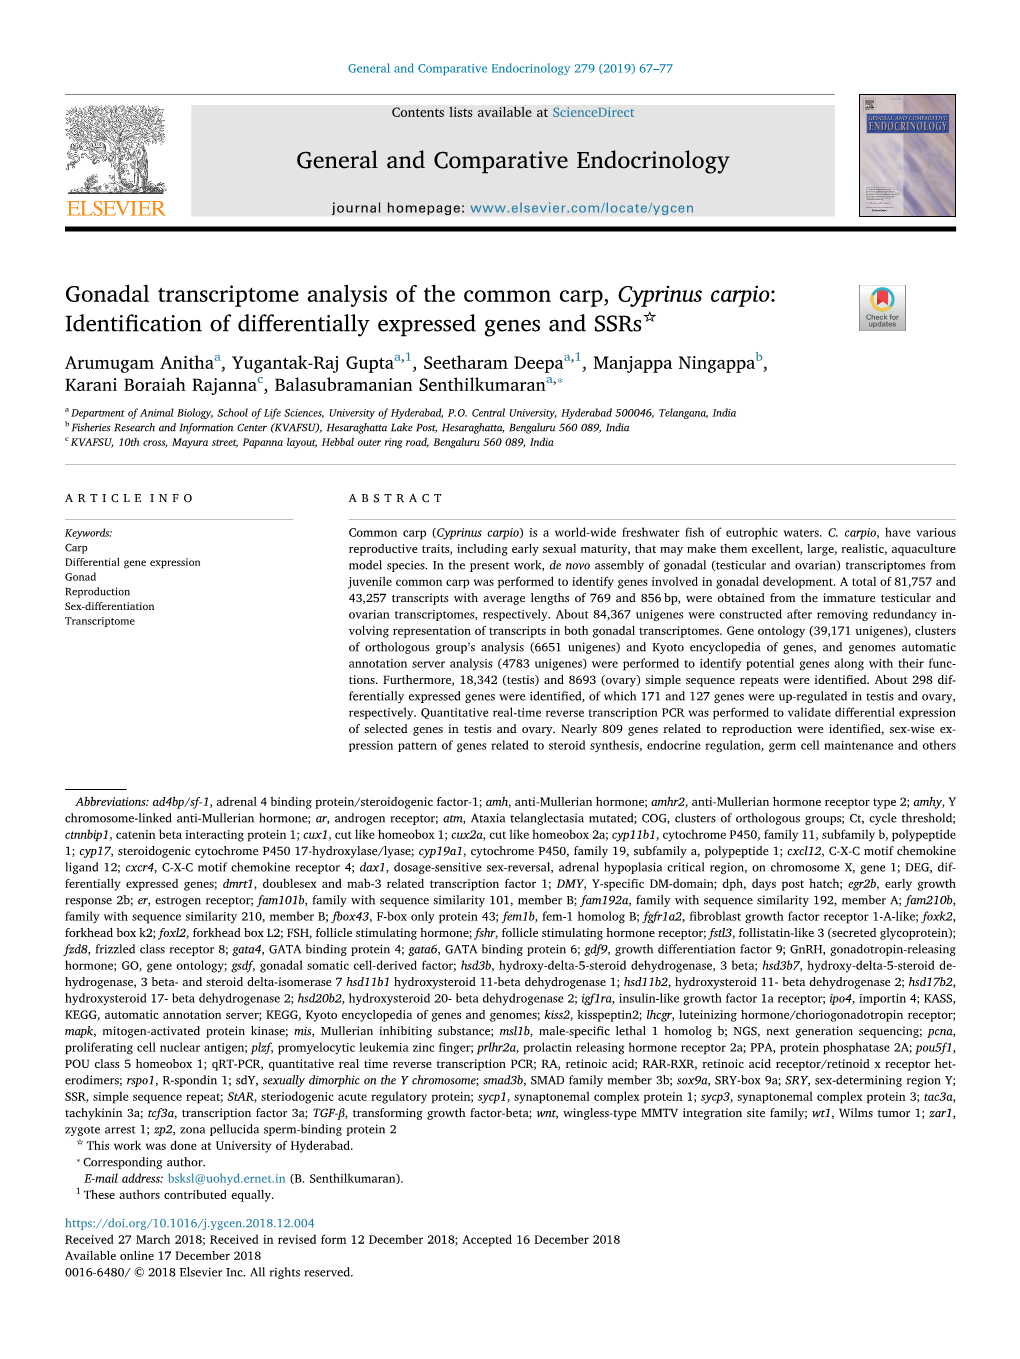 Gonadal Transcriptome Analysis of the Common Carp, Cyprinus Carpio Identification of Differentially Expressed Genes and Ssrs